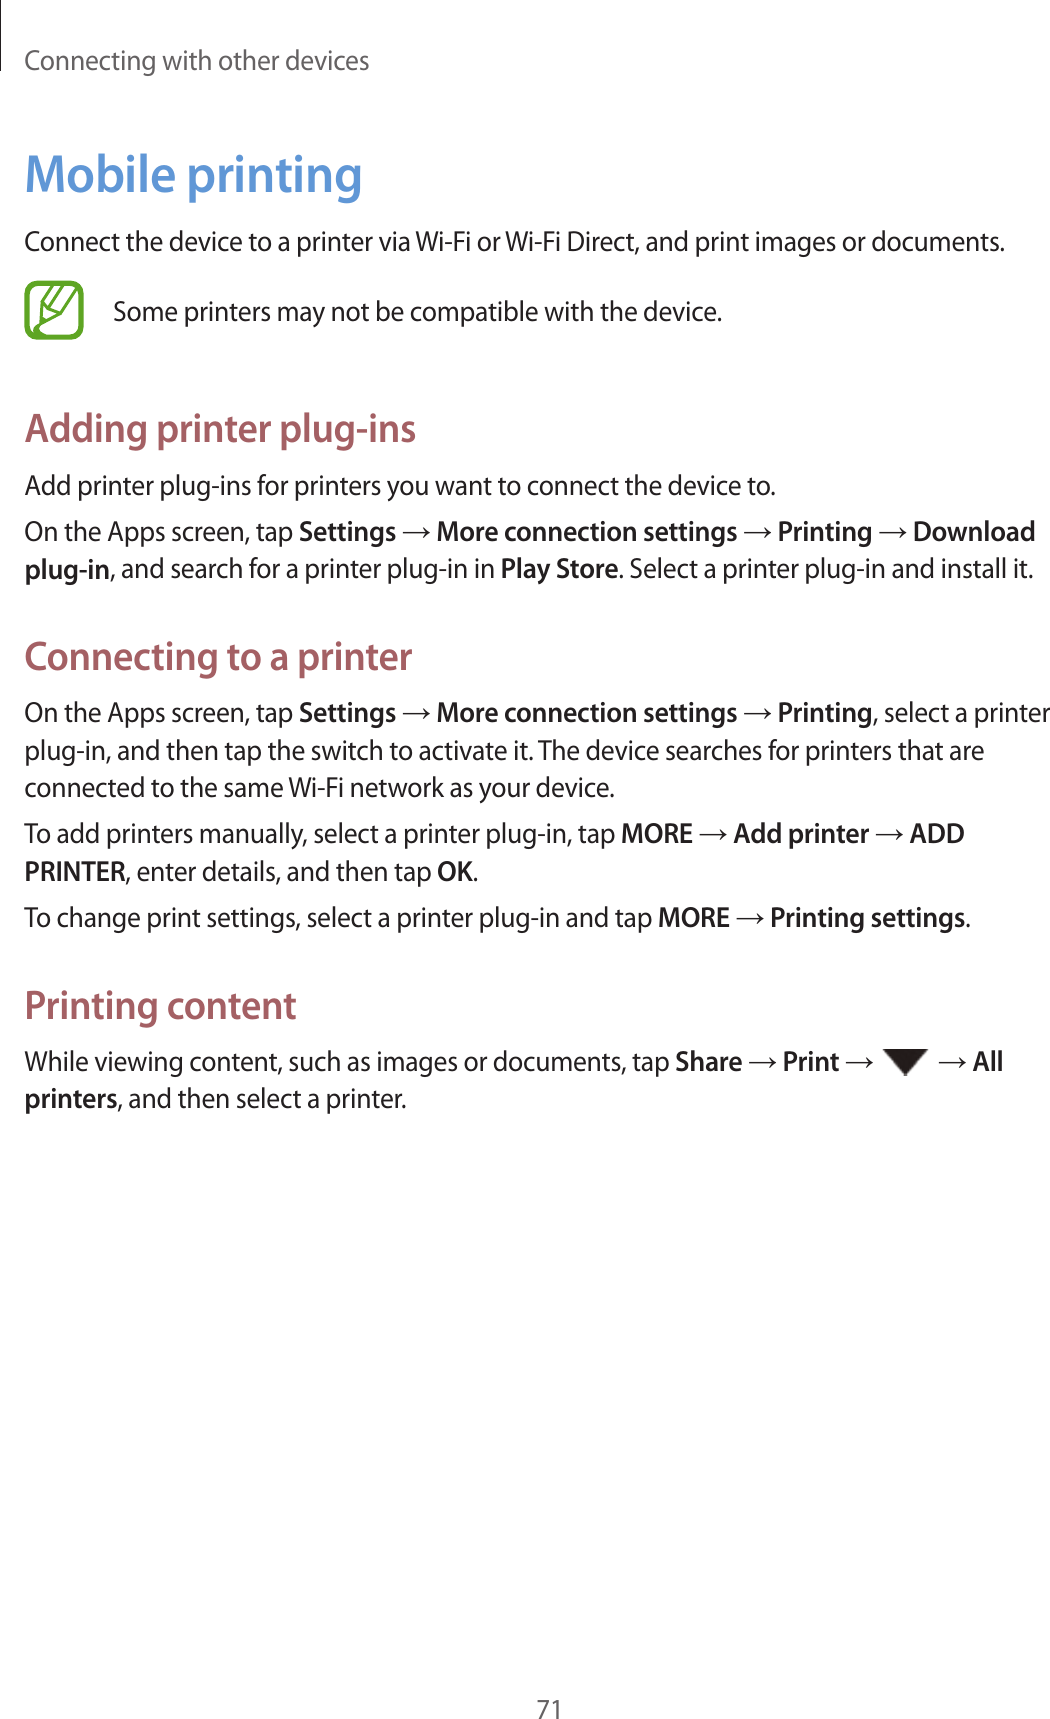 Connecting with other devices71Mobile printingConnect the device to a printer via Wi-Fi or Wi-Fi Direct, and print images or documents.Some printers may not be compatible with the device.Adding printer plug-insAdd printer plug-ins for printers you want to connect the device to.On the Apps screen, tap Settings → More connection settings → Printing → Download plug-in, and search for a printer plug-in in Play Store. Select a printer plug-in and install it.Connecting to a printerOn the Apps screen, tap Settings → More connection settings → Printing, select a printer plug-in, and then tap the switch to activate it. The device searches for printers that are connected to the same Wi-Fi network as your device.To add printers manually, select a printer plug-in, tap MORE → Add printer → ADD PRINTER, enter details, and then tap OK.To change print settings, select a printer plug-in and tap MORE → Printing settings.Printing contentWhile viewing content, such as images or documents, tap Share → Print →   → All printers, and then select a printer.